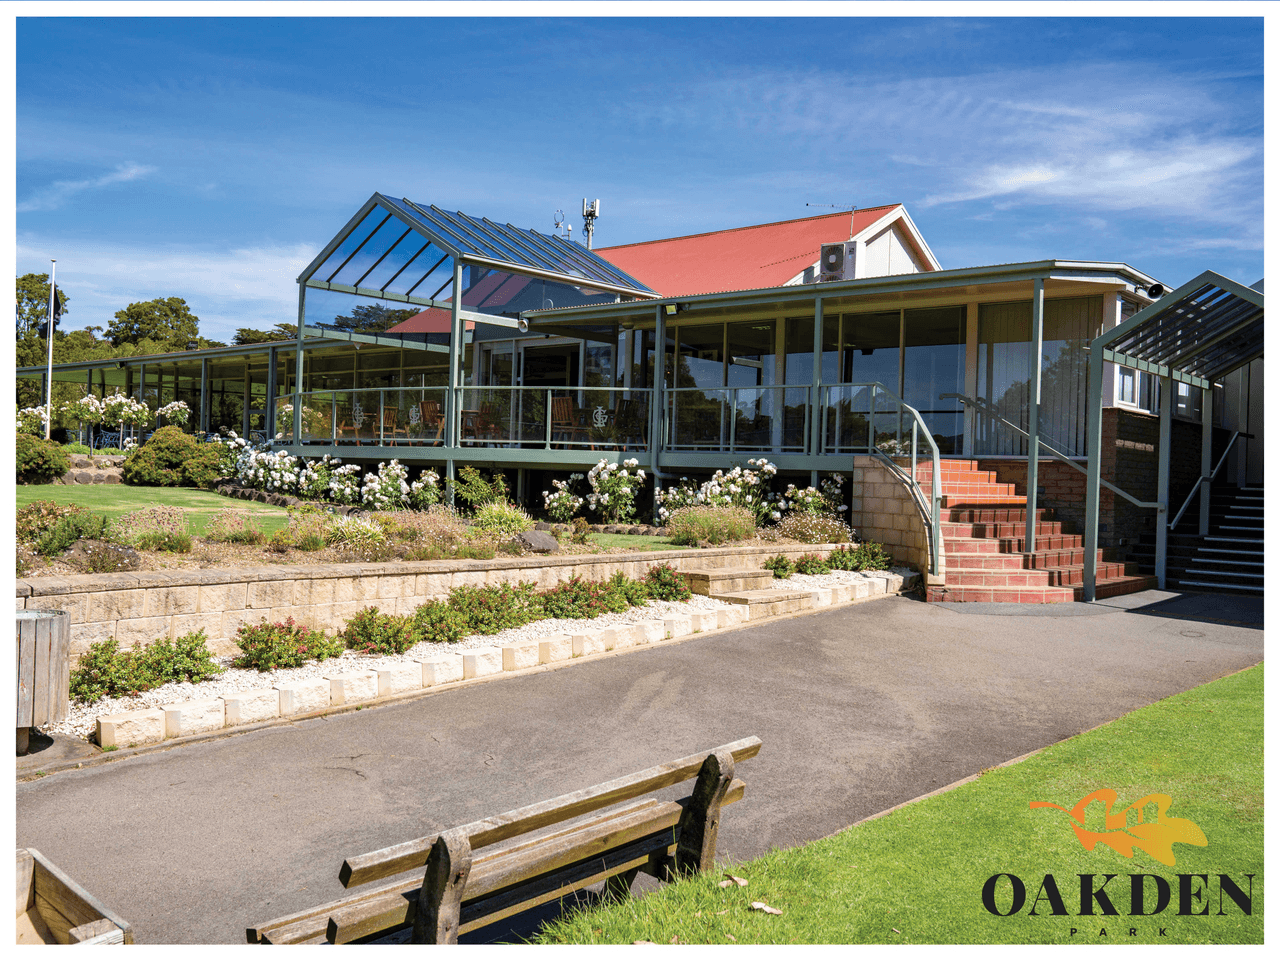 Stage 6 Oakden Park, YOUNGTOWN, TAS 7249